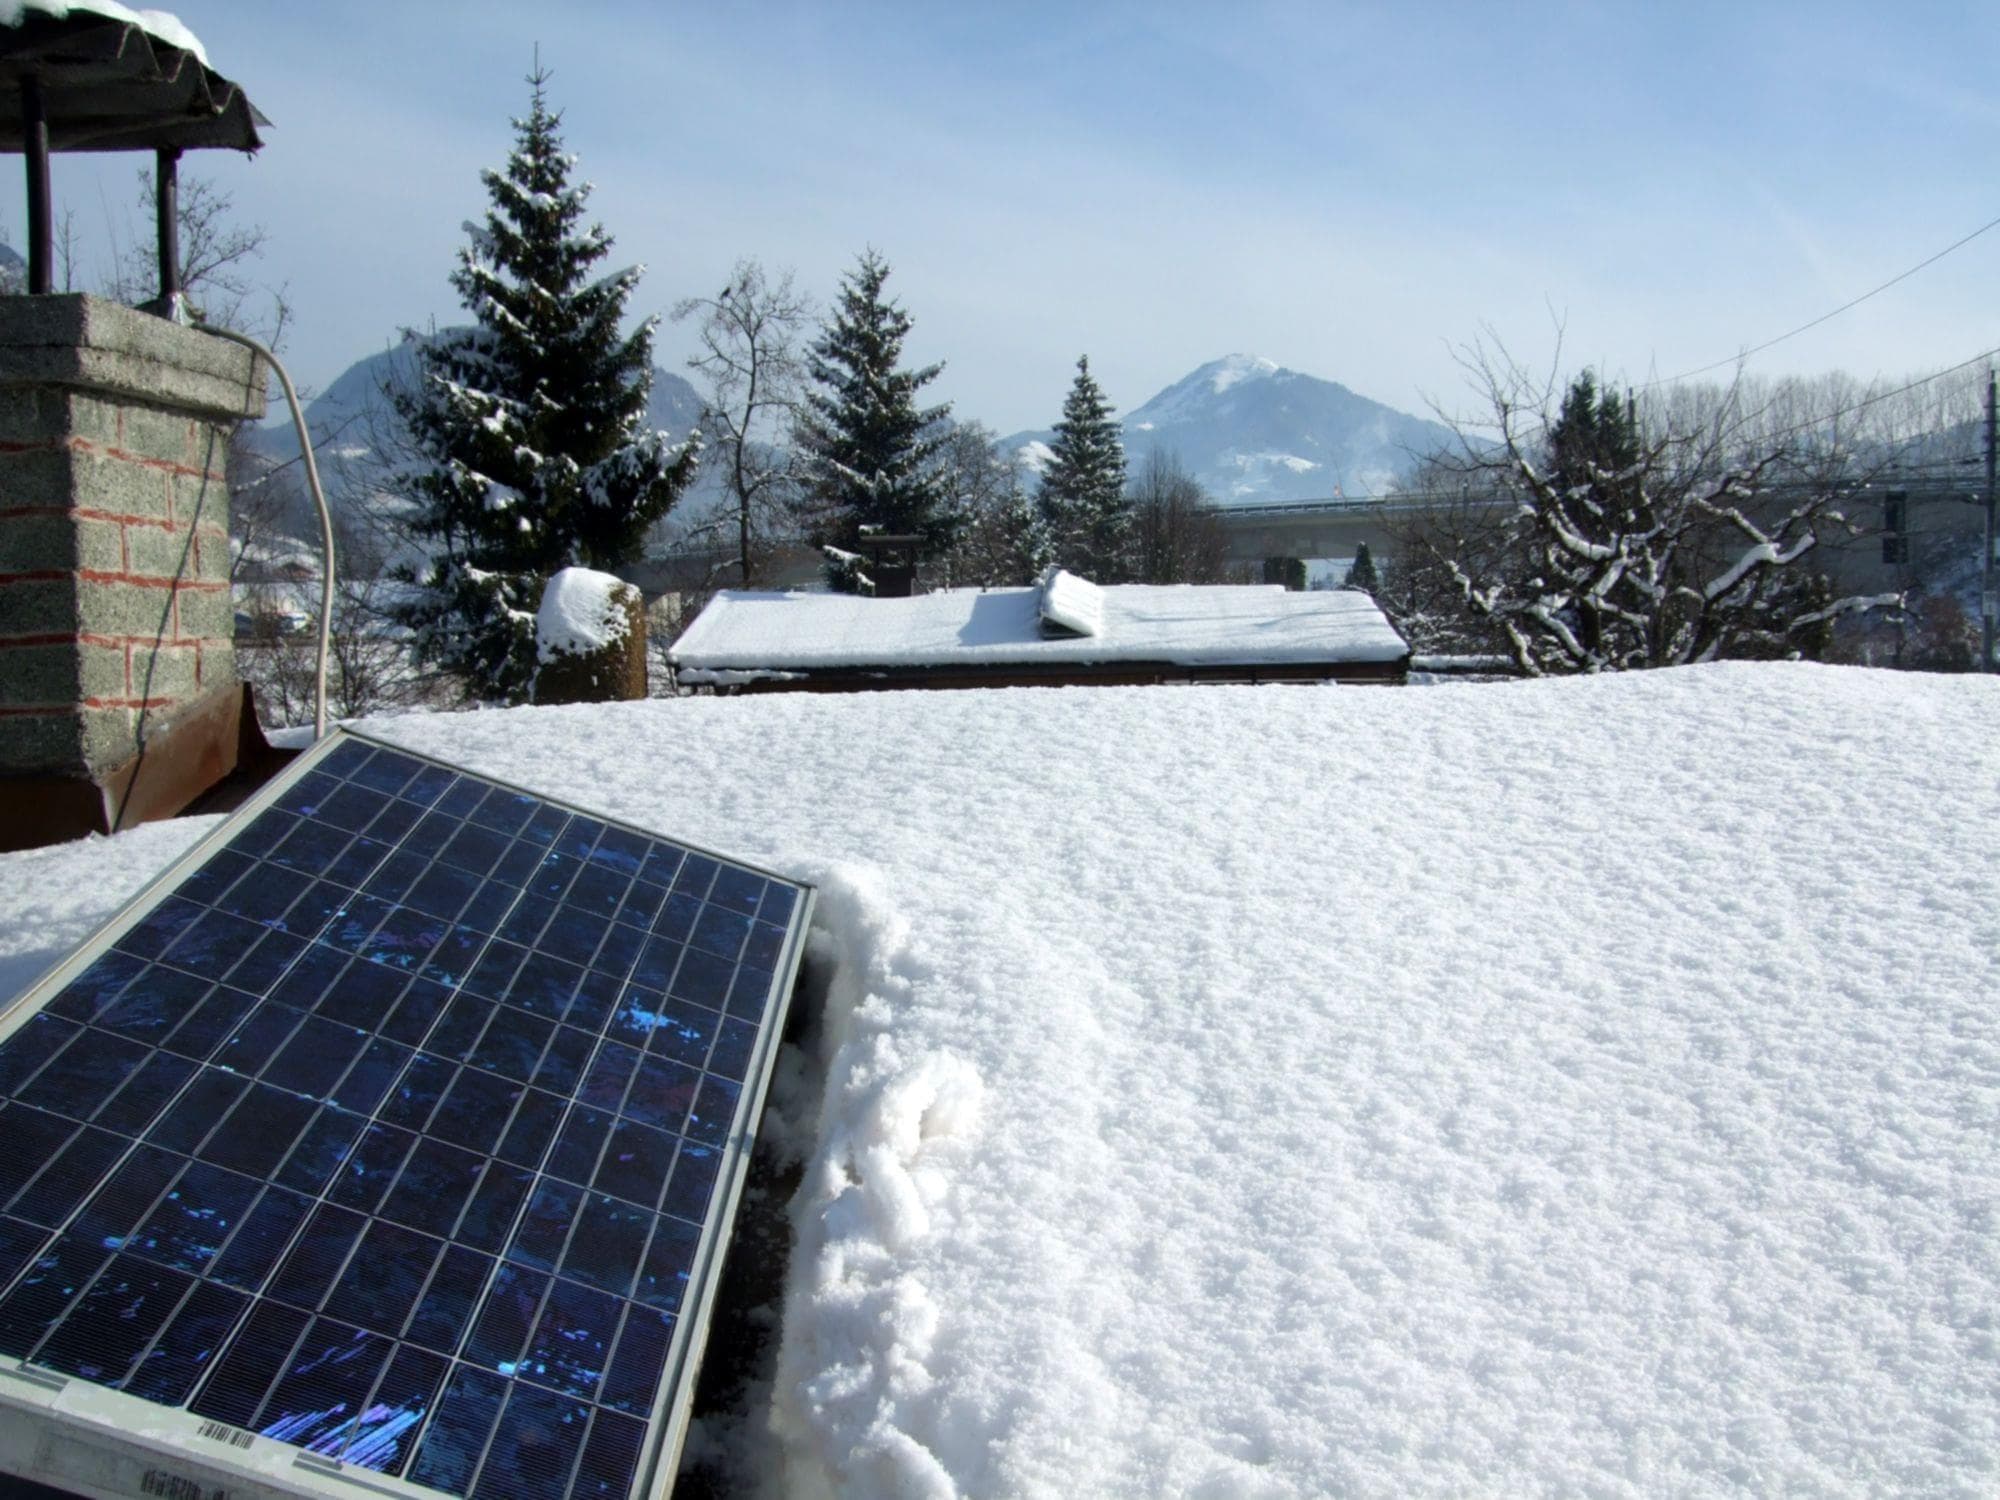 solar panel on snowy residential roof with mountains in background